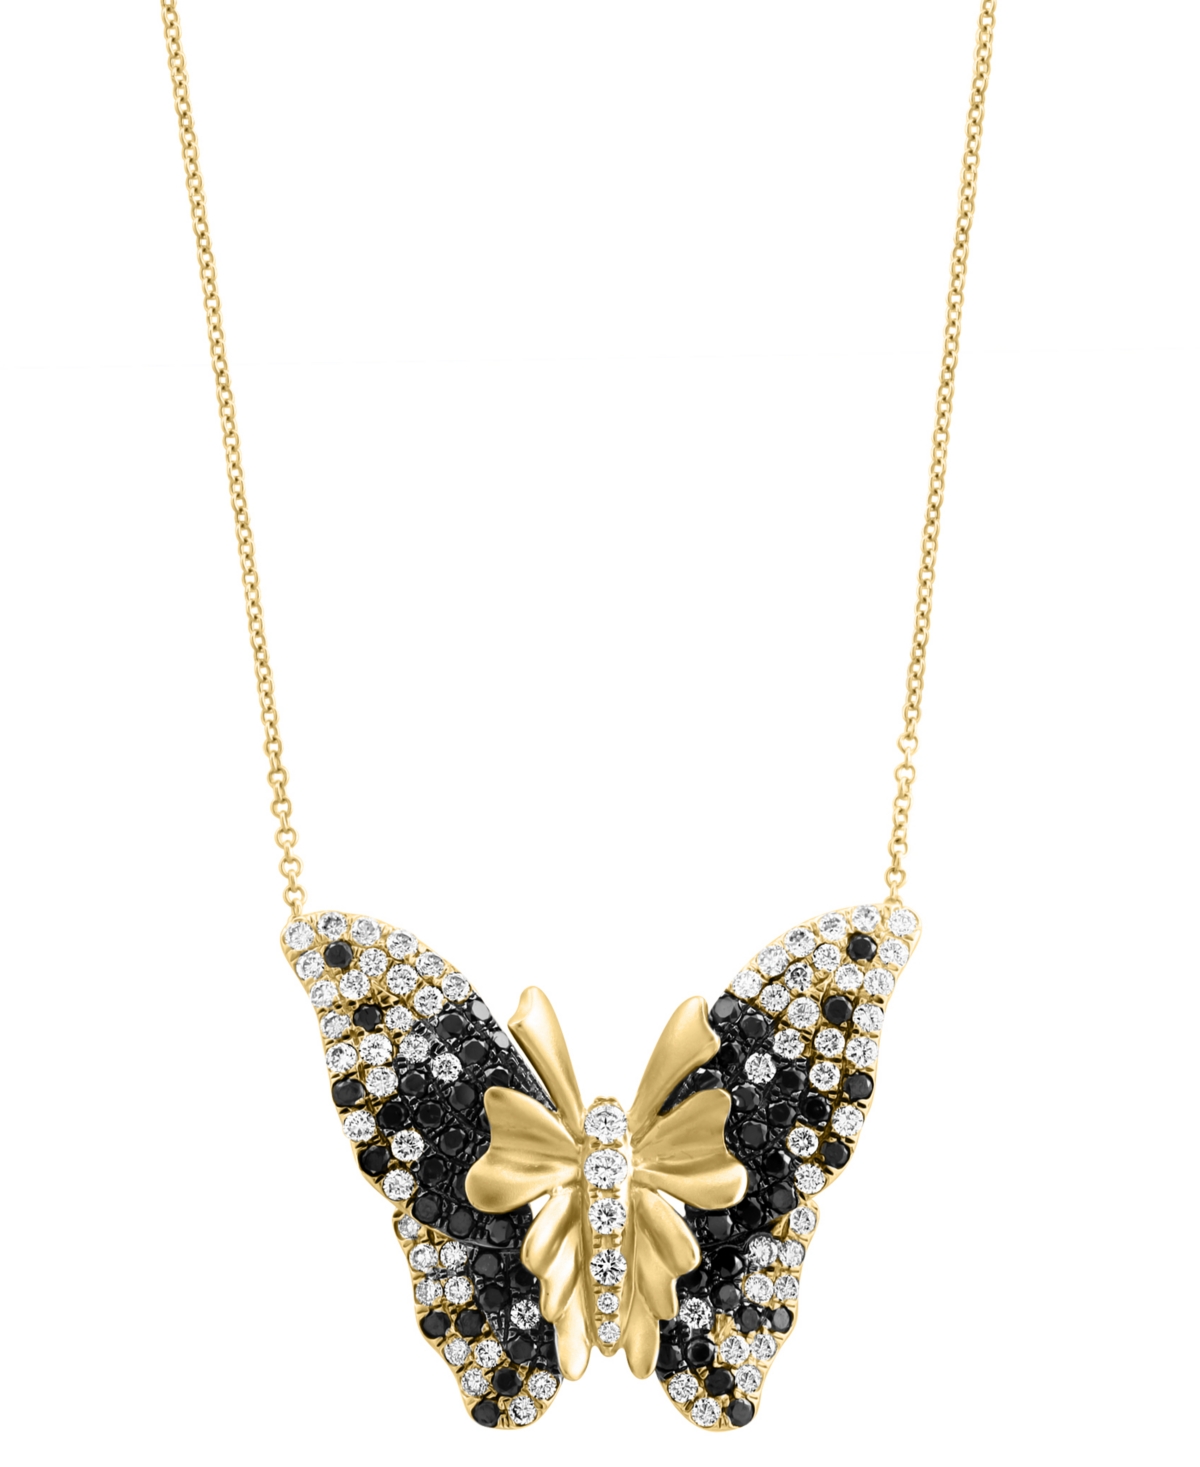 Effy Black Diamond (1-1/5 ct. t.w.) & White Diamond (1-1/2 ct. t.w.) Butterfly 18" Pendant Necklace in 14k Gold - Yellow Gold